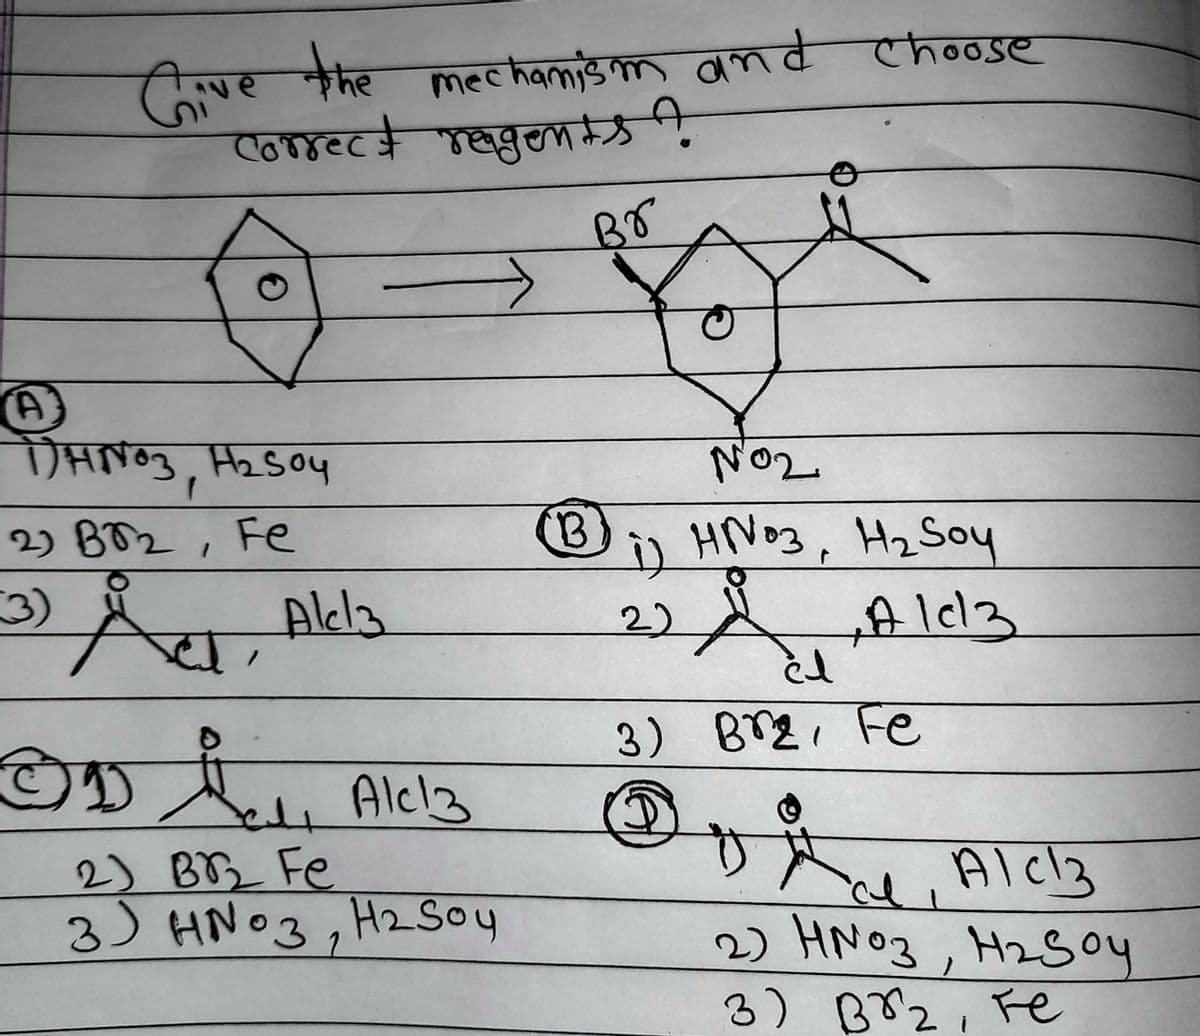 Give the
mechanism and choose
correct reagents?
Br
NO₂
1) HN03, H₂ Soy
A
22
0 ]cl
3) Br₂, Fe
3
al
AIc3
2) HNO3, H₂Soy
3) во г, те
A
DHNO3, H₂SO4
f
2) BT2, Fe
1
(3)
Å, Akla
OD ₁ Ale 13
e
2) BB2₂ Fe
3 HNO3, H₂ Soy
B
لغ